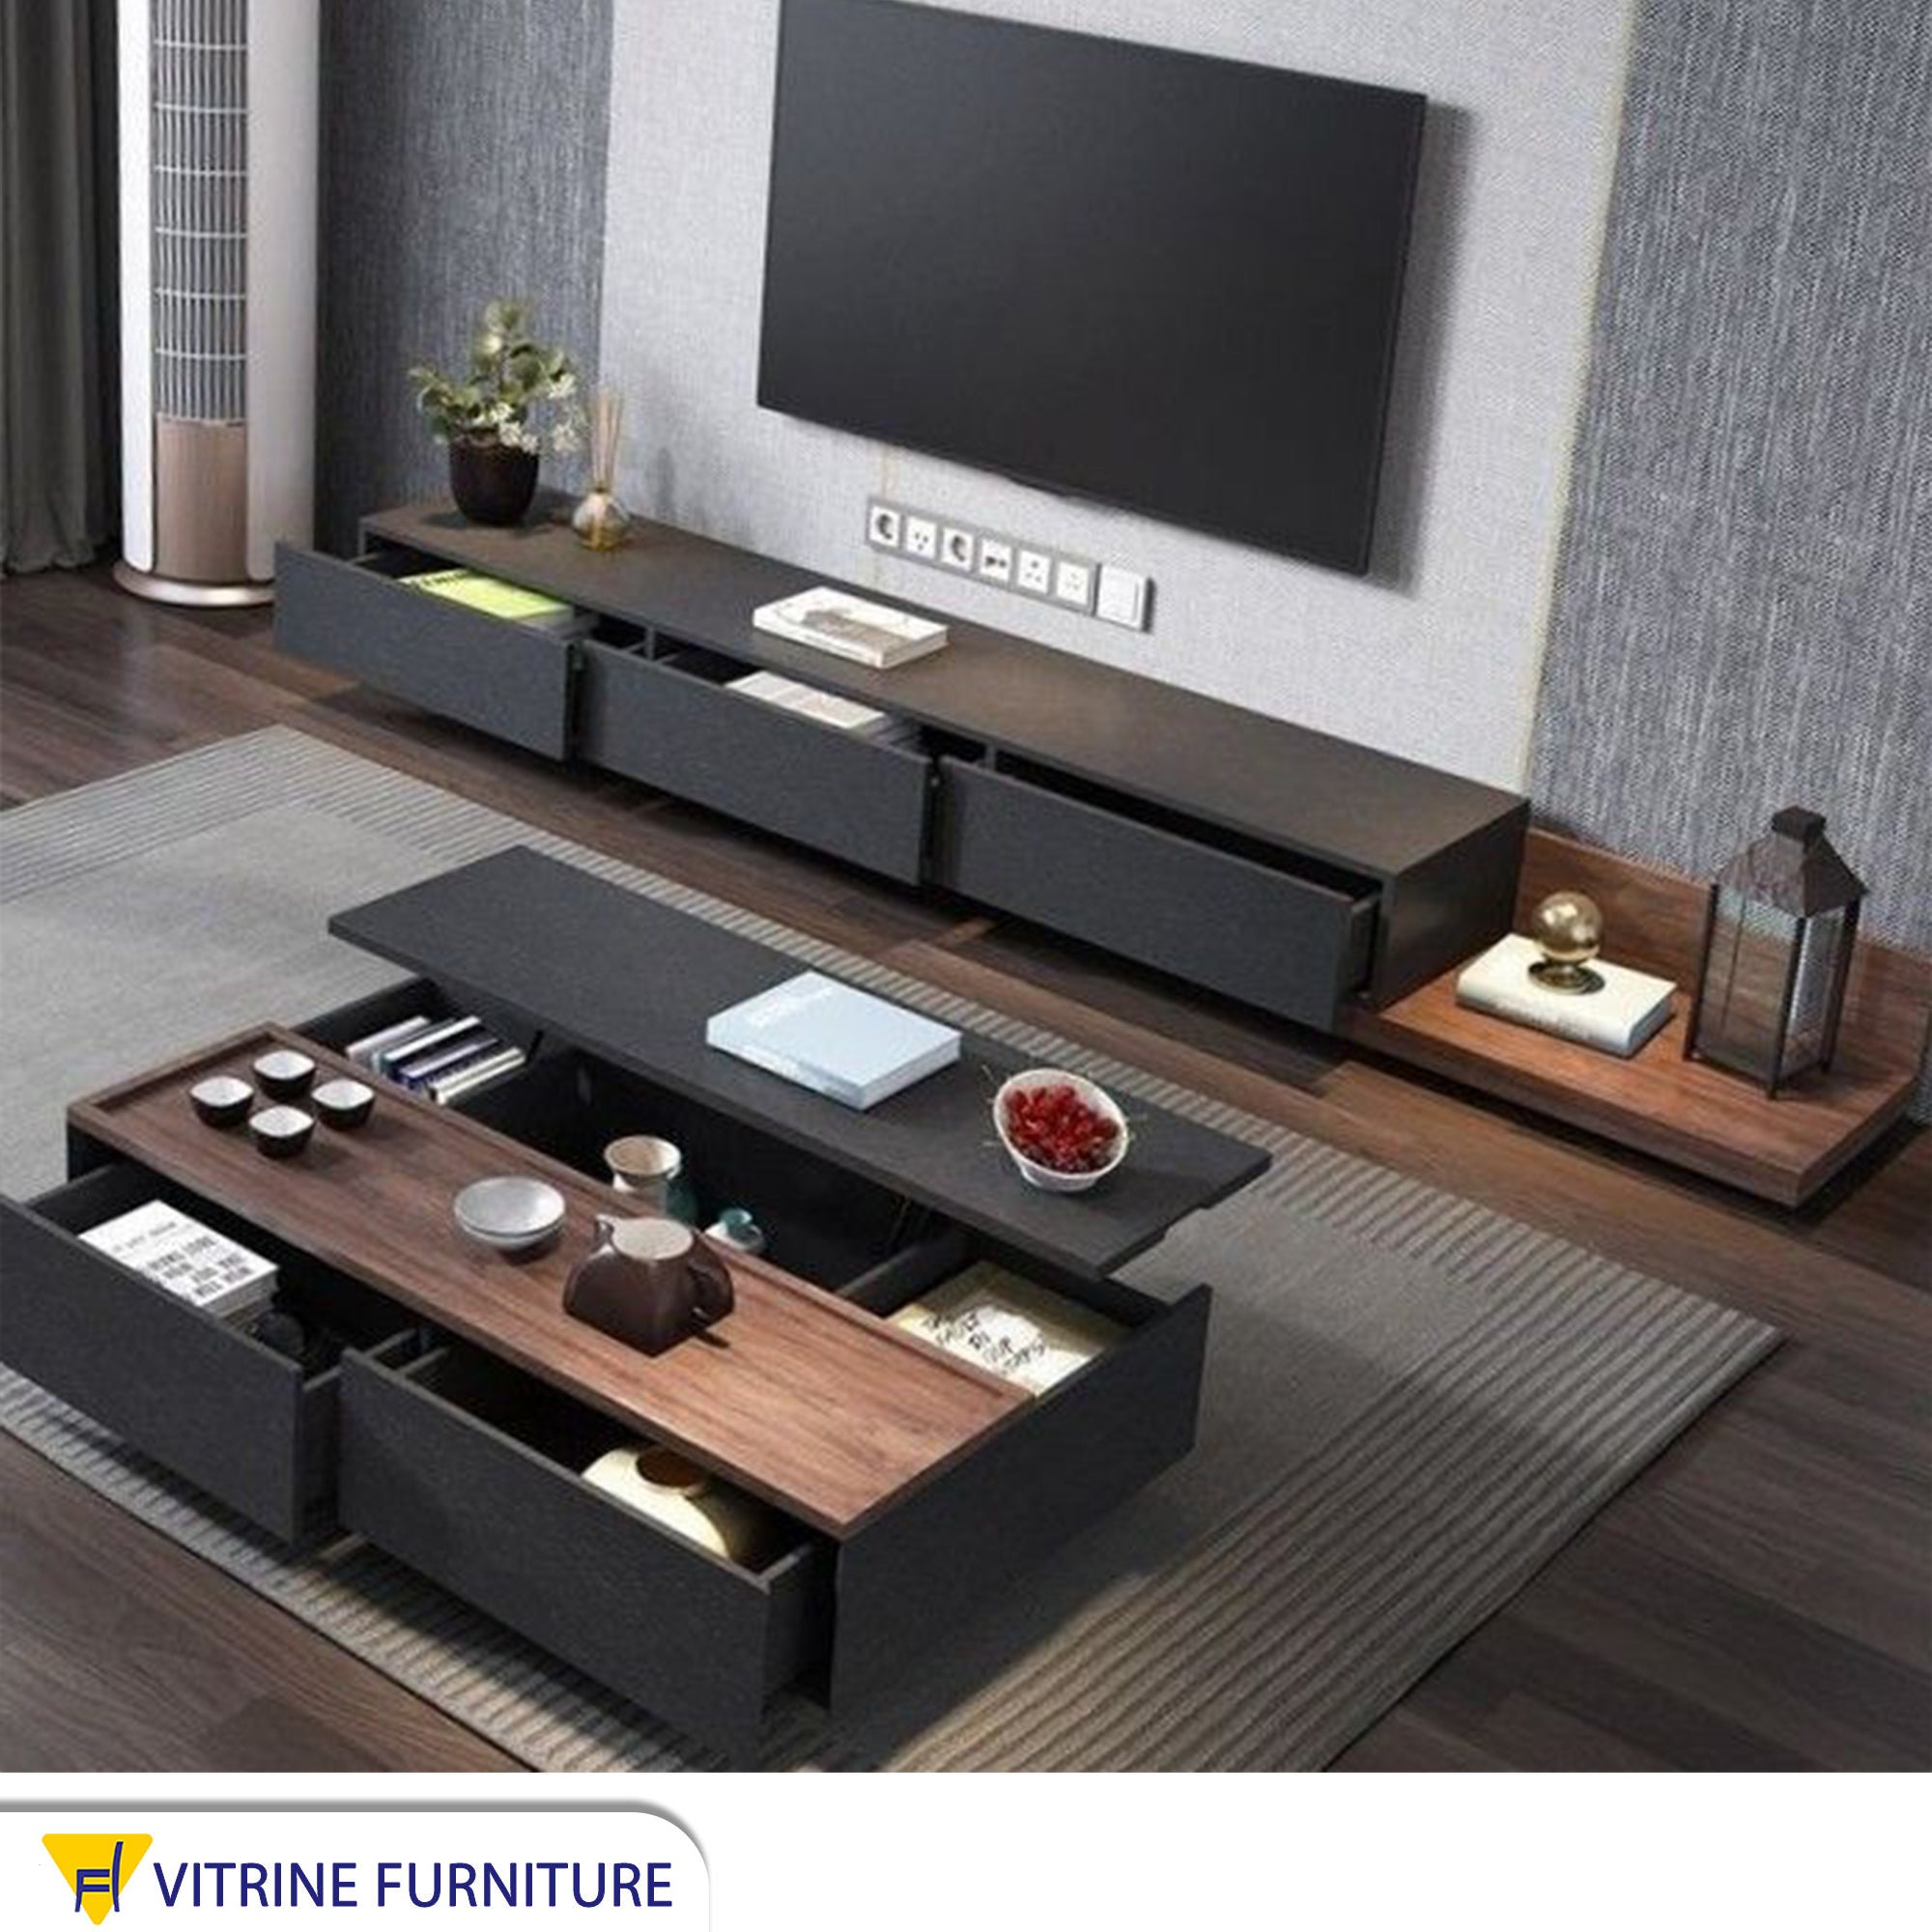 TV unit and table in black mixed with wood